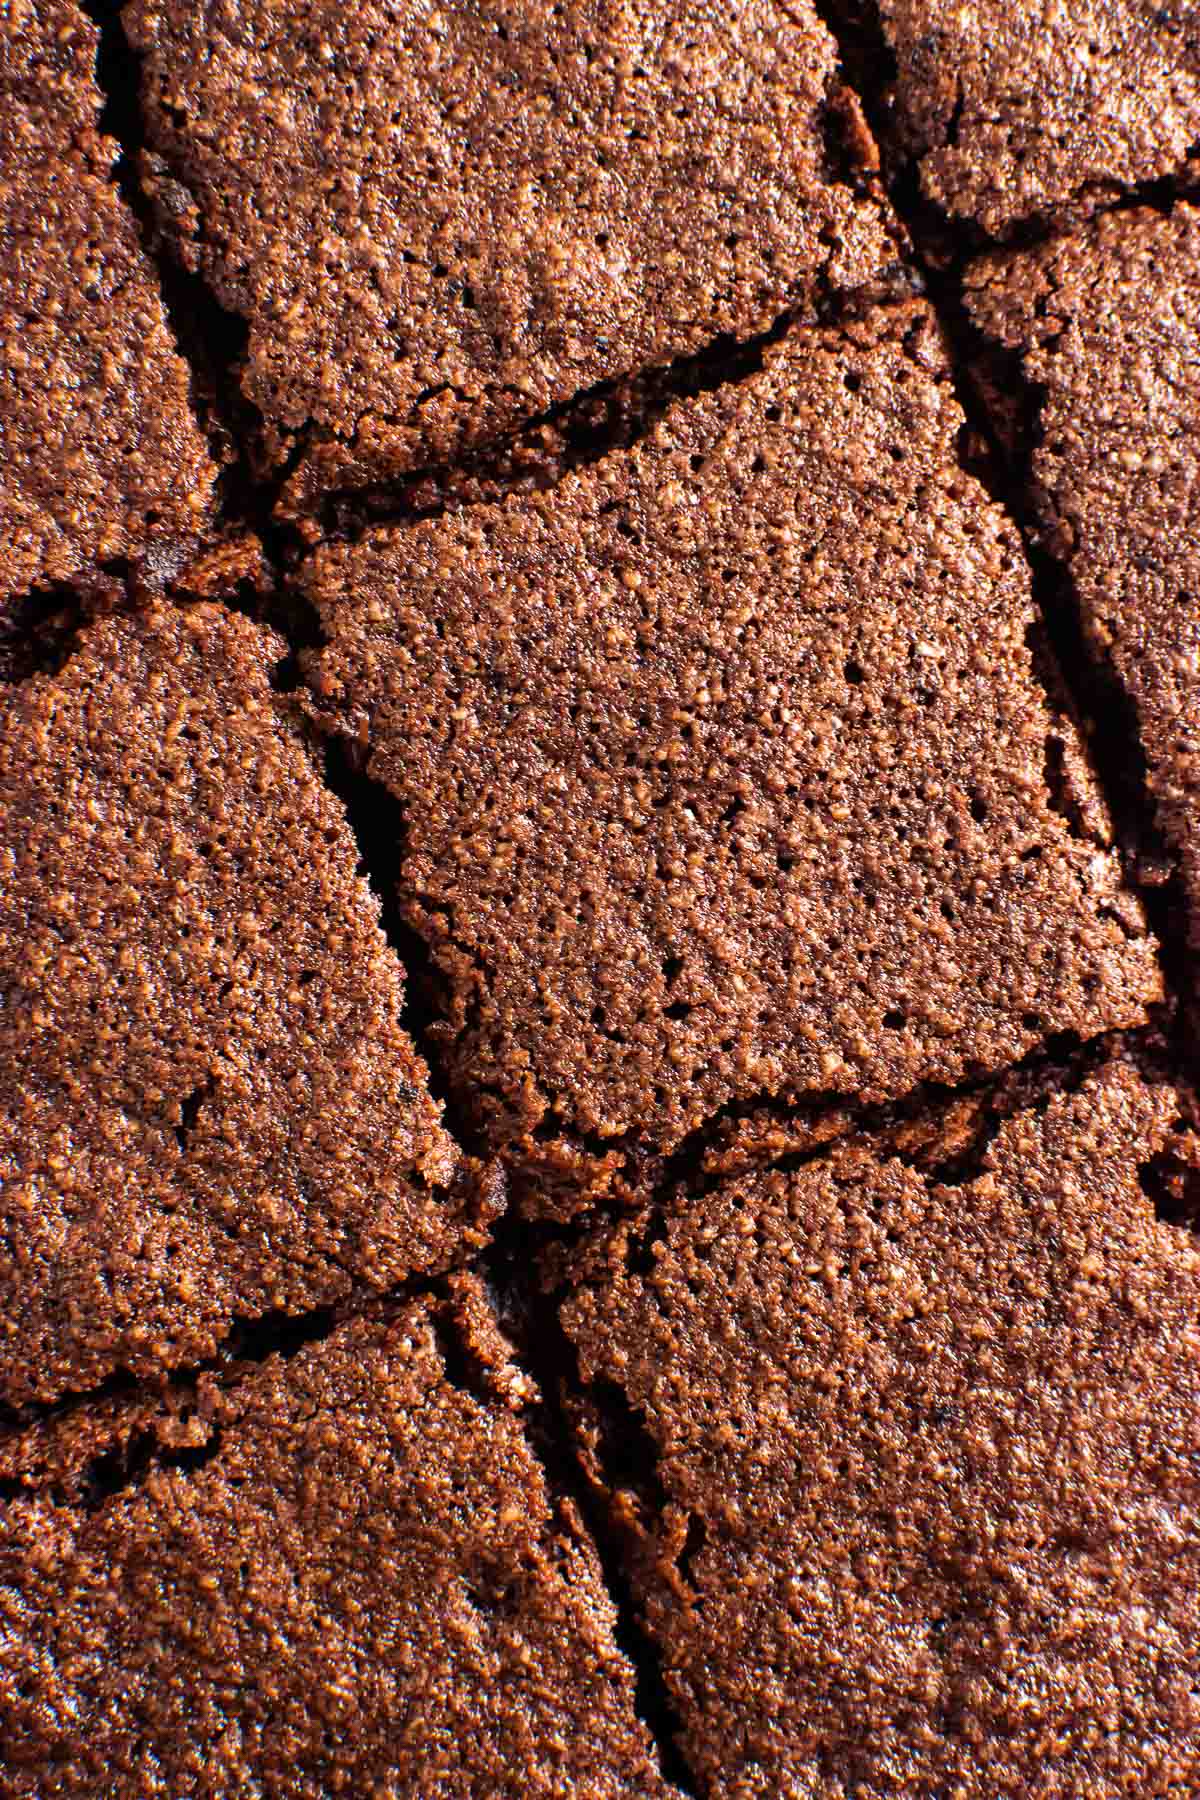 Brownies cut into squares for serving.